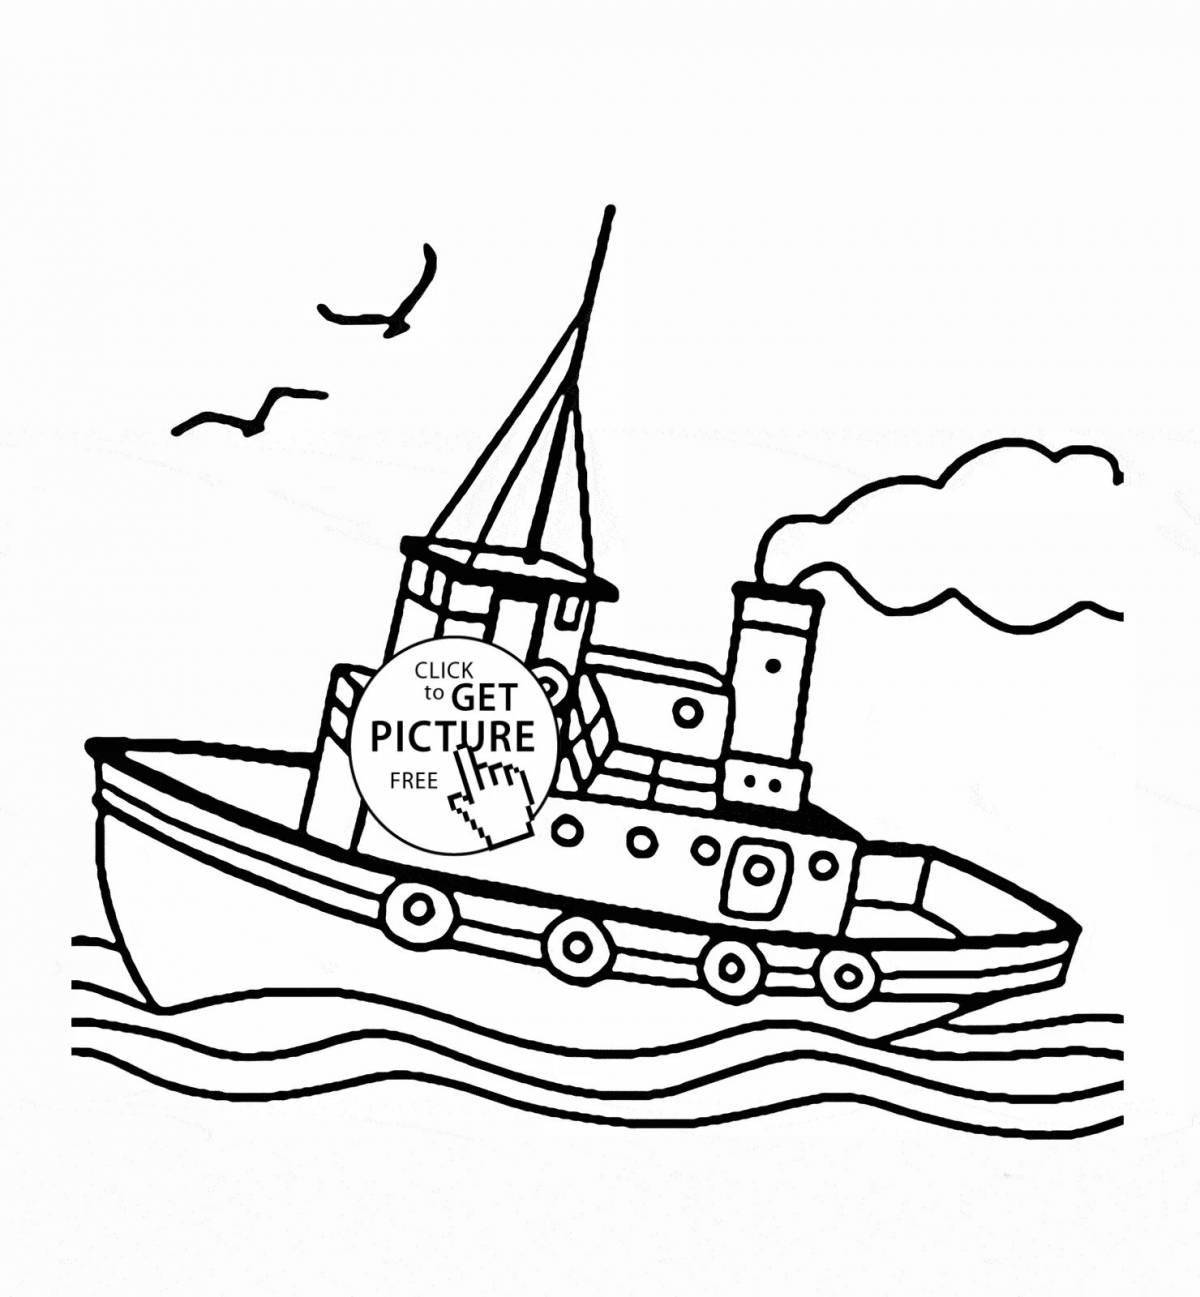 Amazing steamship coloring page